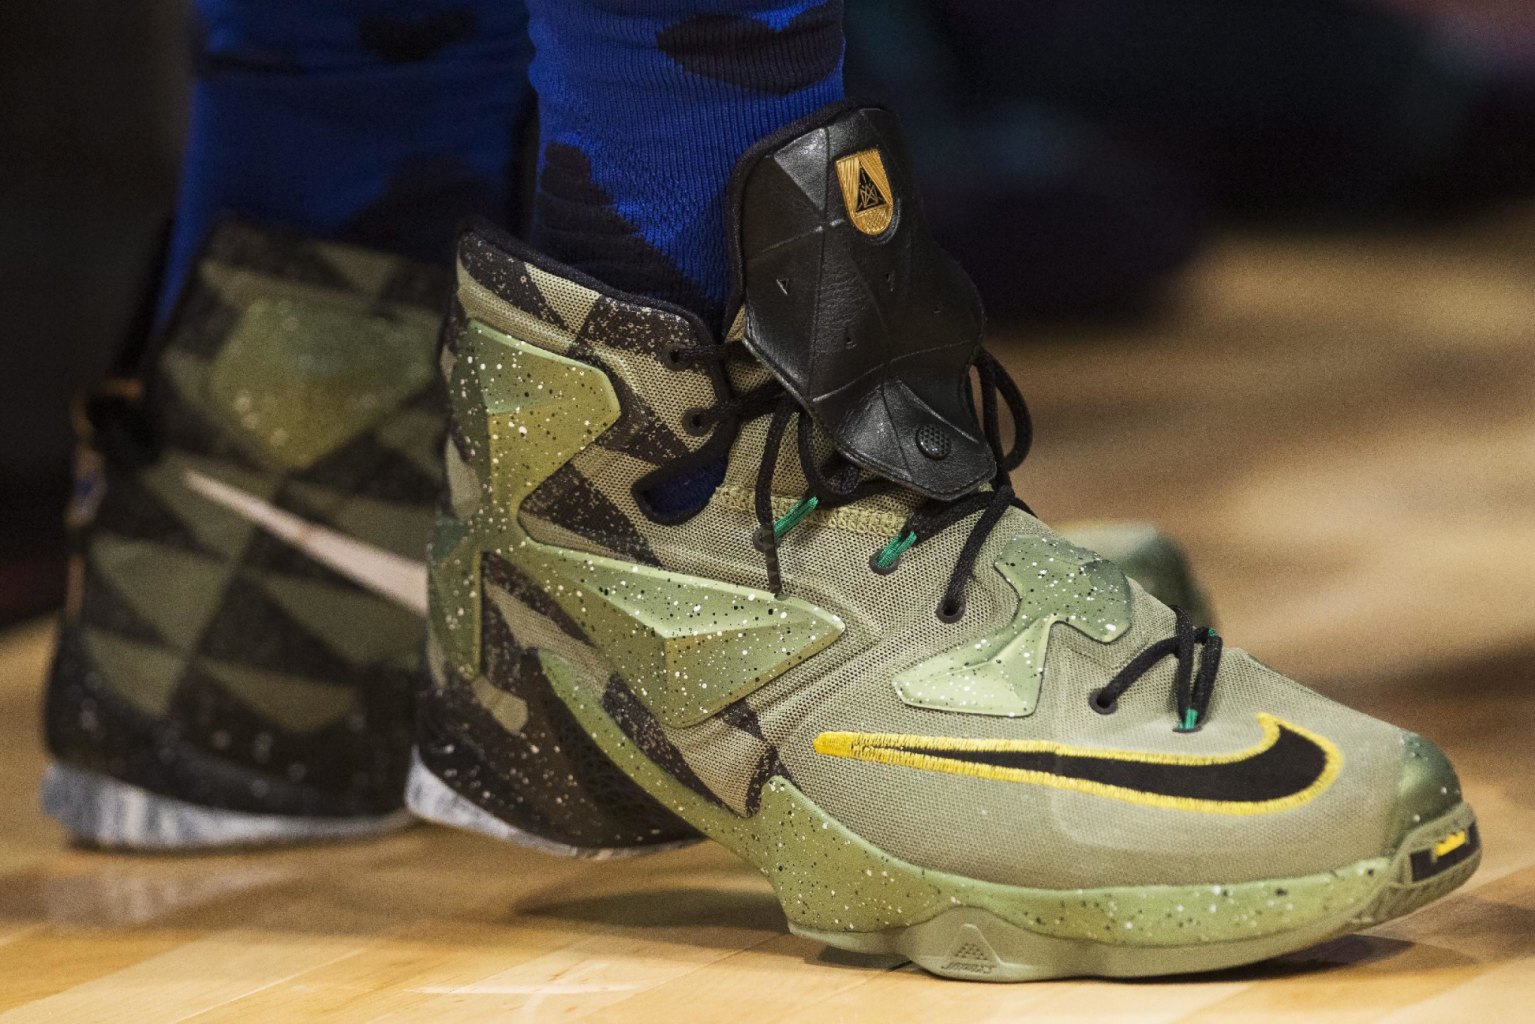 LeBron James Wearing the &quot;All Star&quot; Nike LeBron 13